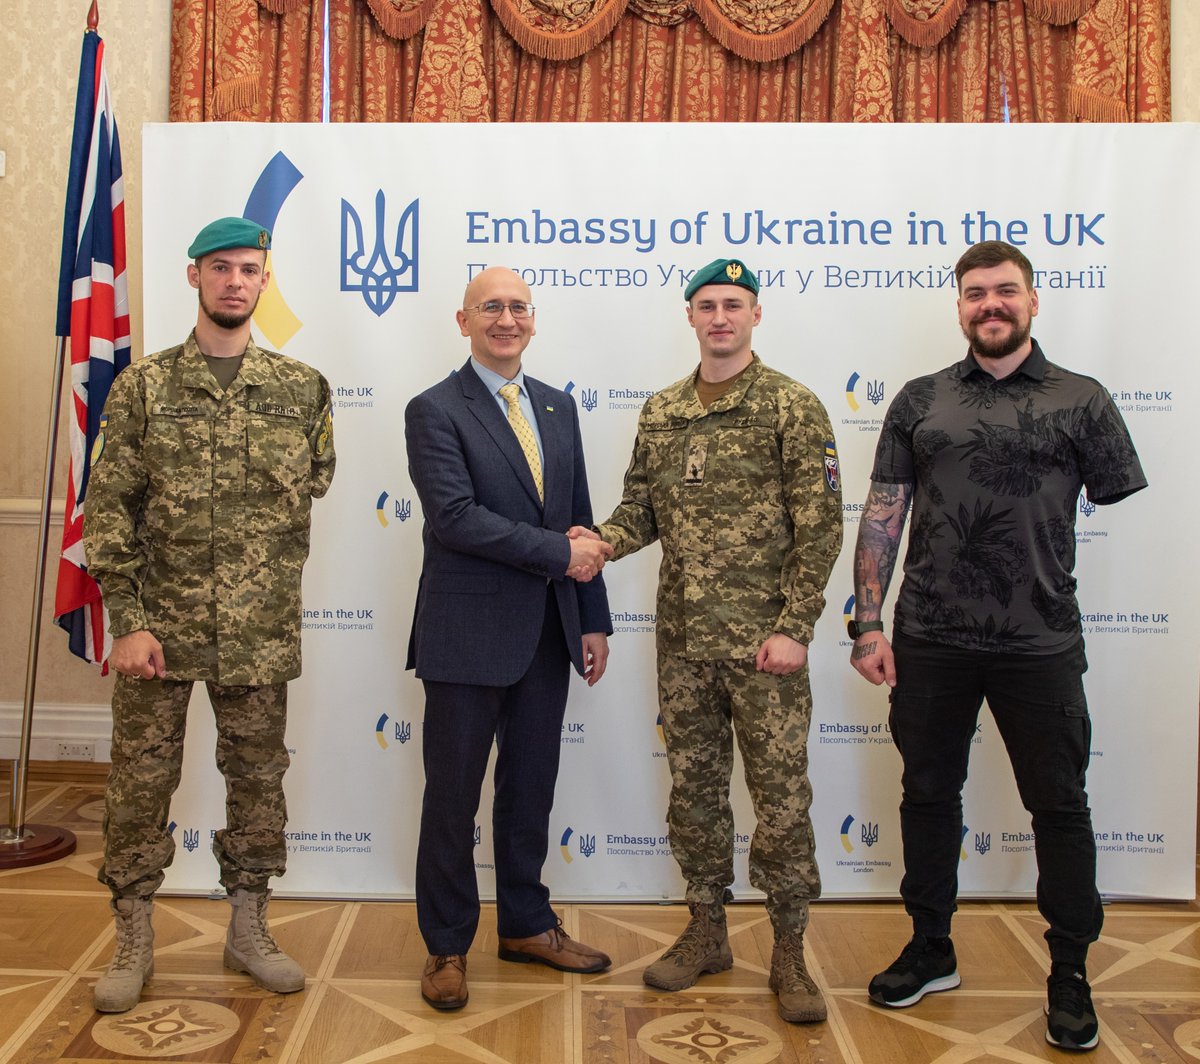 It was an absolute honour to welcome the Ukrainian Marine Corps team that will run @LondonMarathon this Sunday. We discussed their preparations for the run, along with many other topics – and we will definitely be cheering for them on April 21!